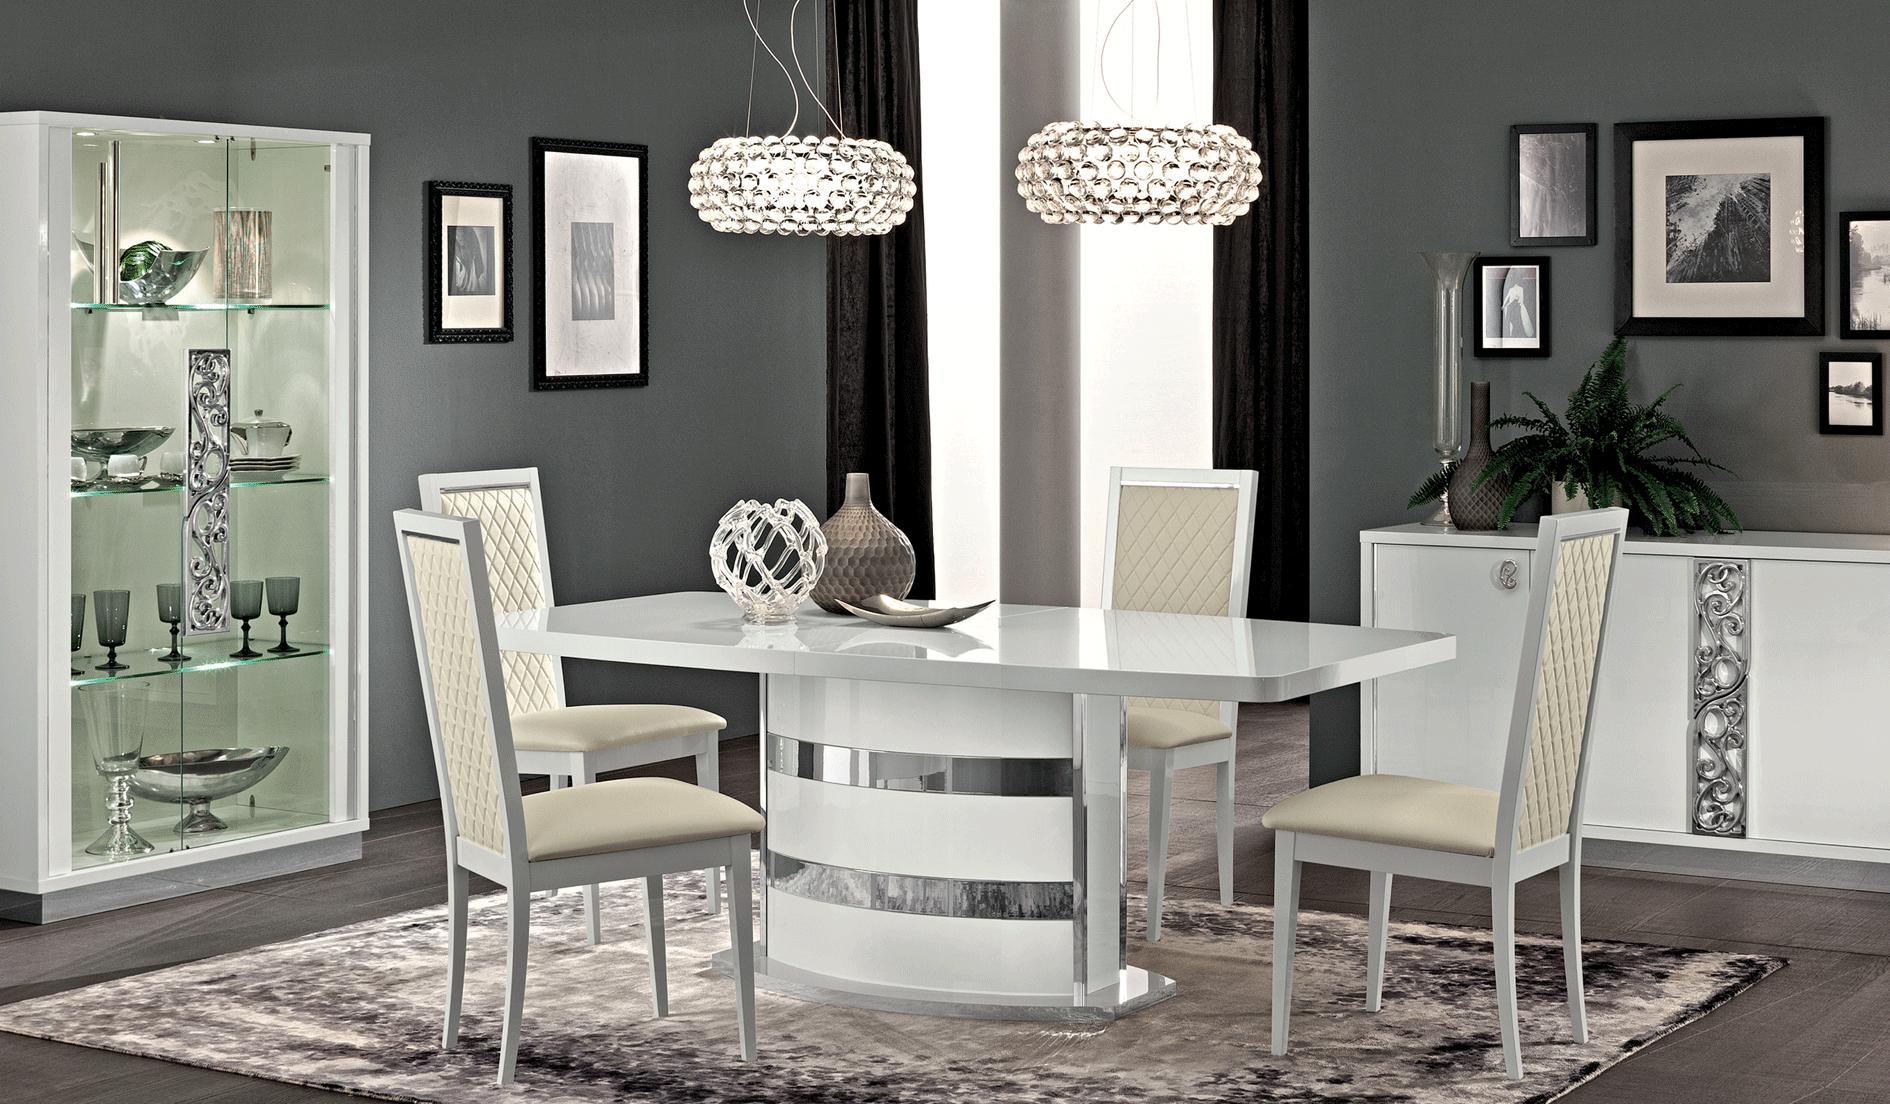 Contemporary Dining Table Set Roma ESF-Roma White-DT-9PC in Cream, White Eco Leather